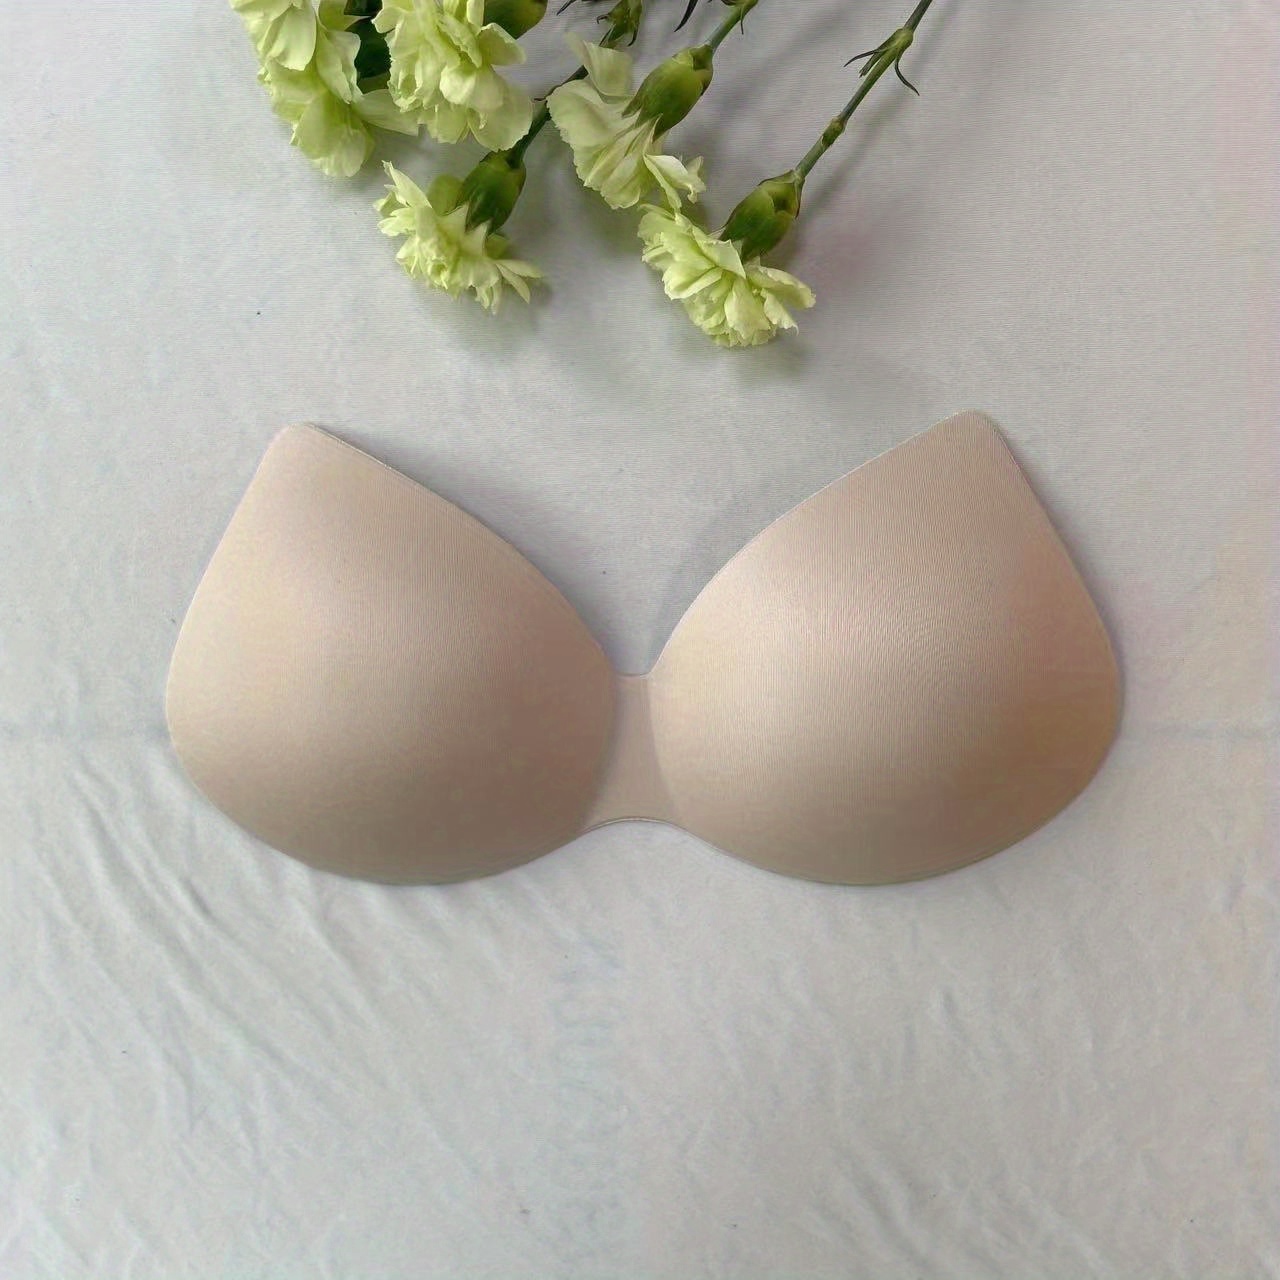 Sew-in Push Up Bra Cups Pads Inserts - 1 pair Size Large (Cup size